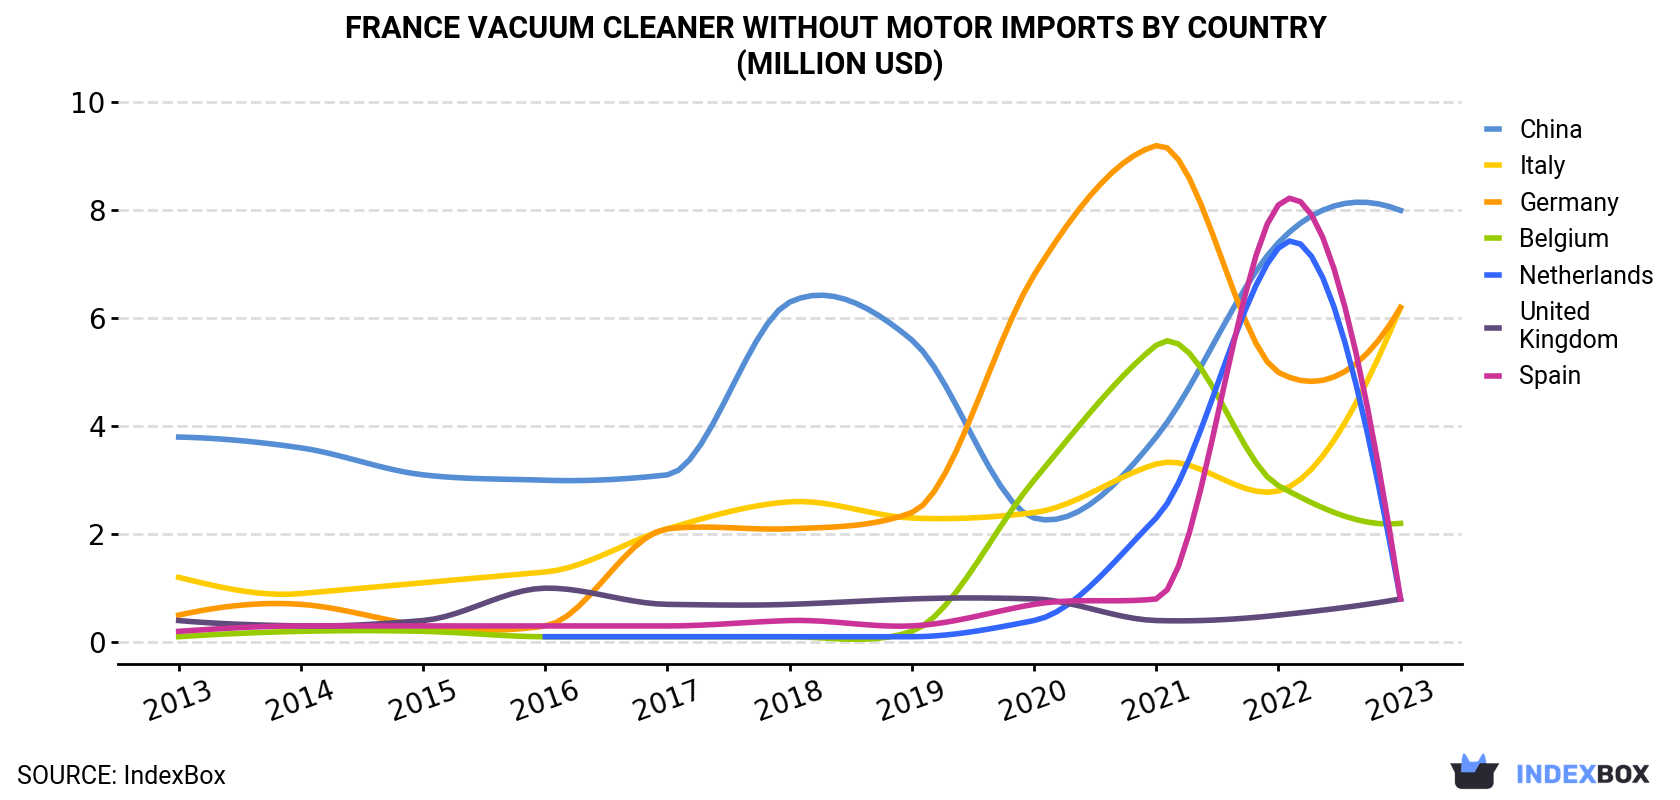 France Vacuum Cleaner Without Motor Imports By Country (Million USD)